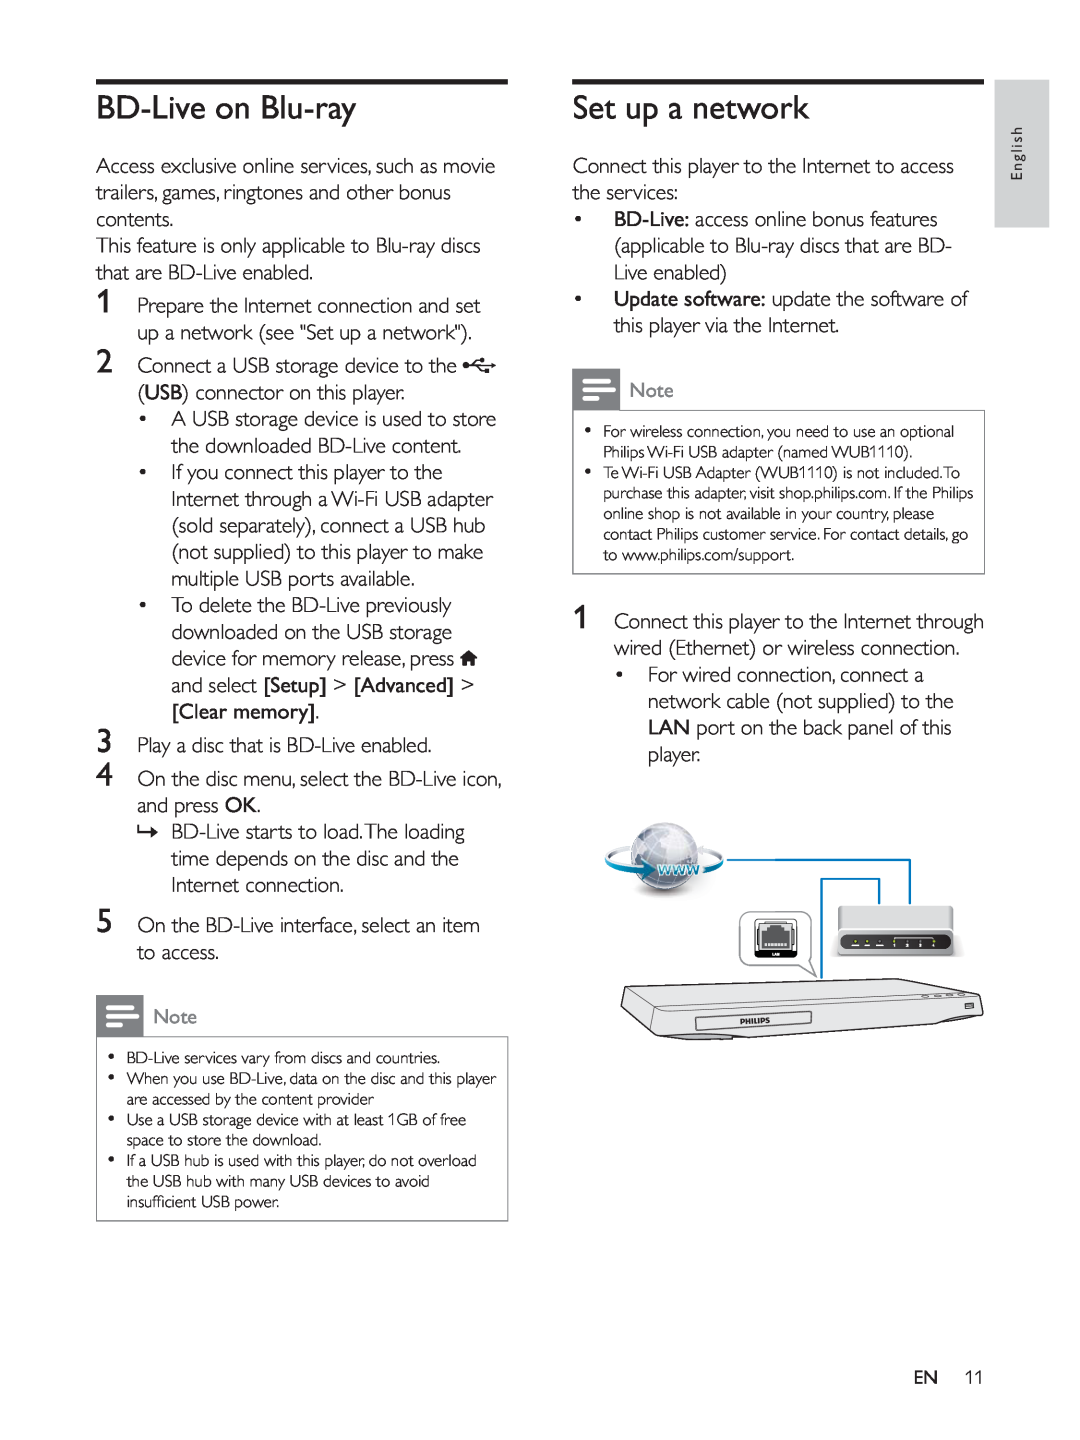 Philips BDP2930 user manual BD-Live on Blu-ray, Set up a network 